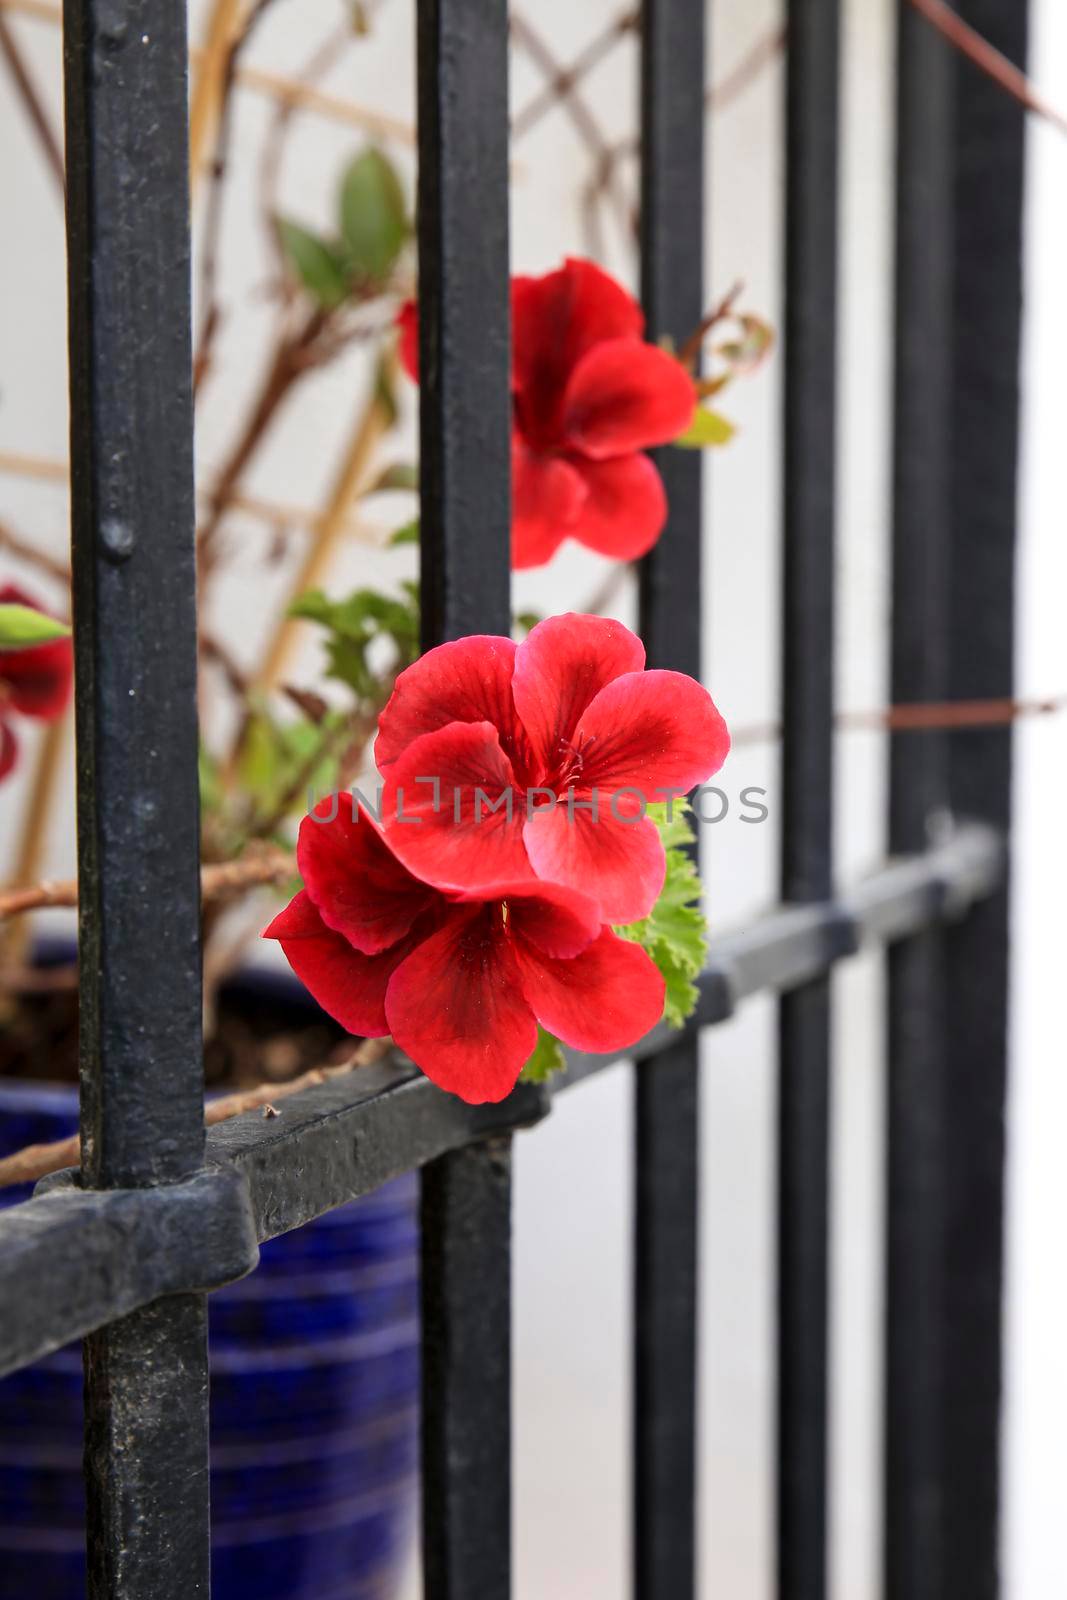 Colorful Potted Pelargonium Graveolens plant in the window behind the fence